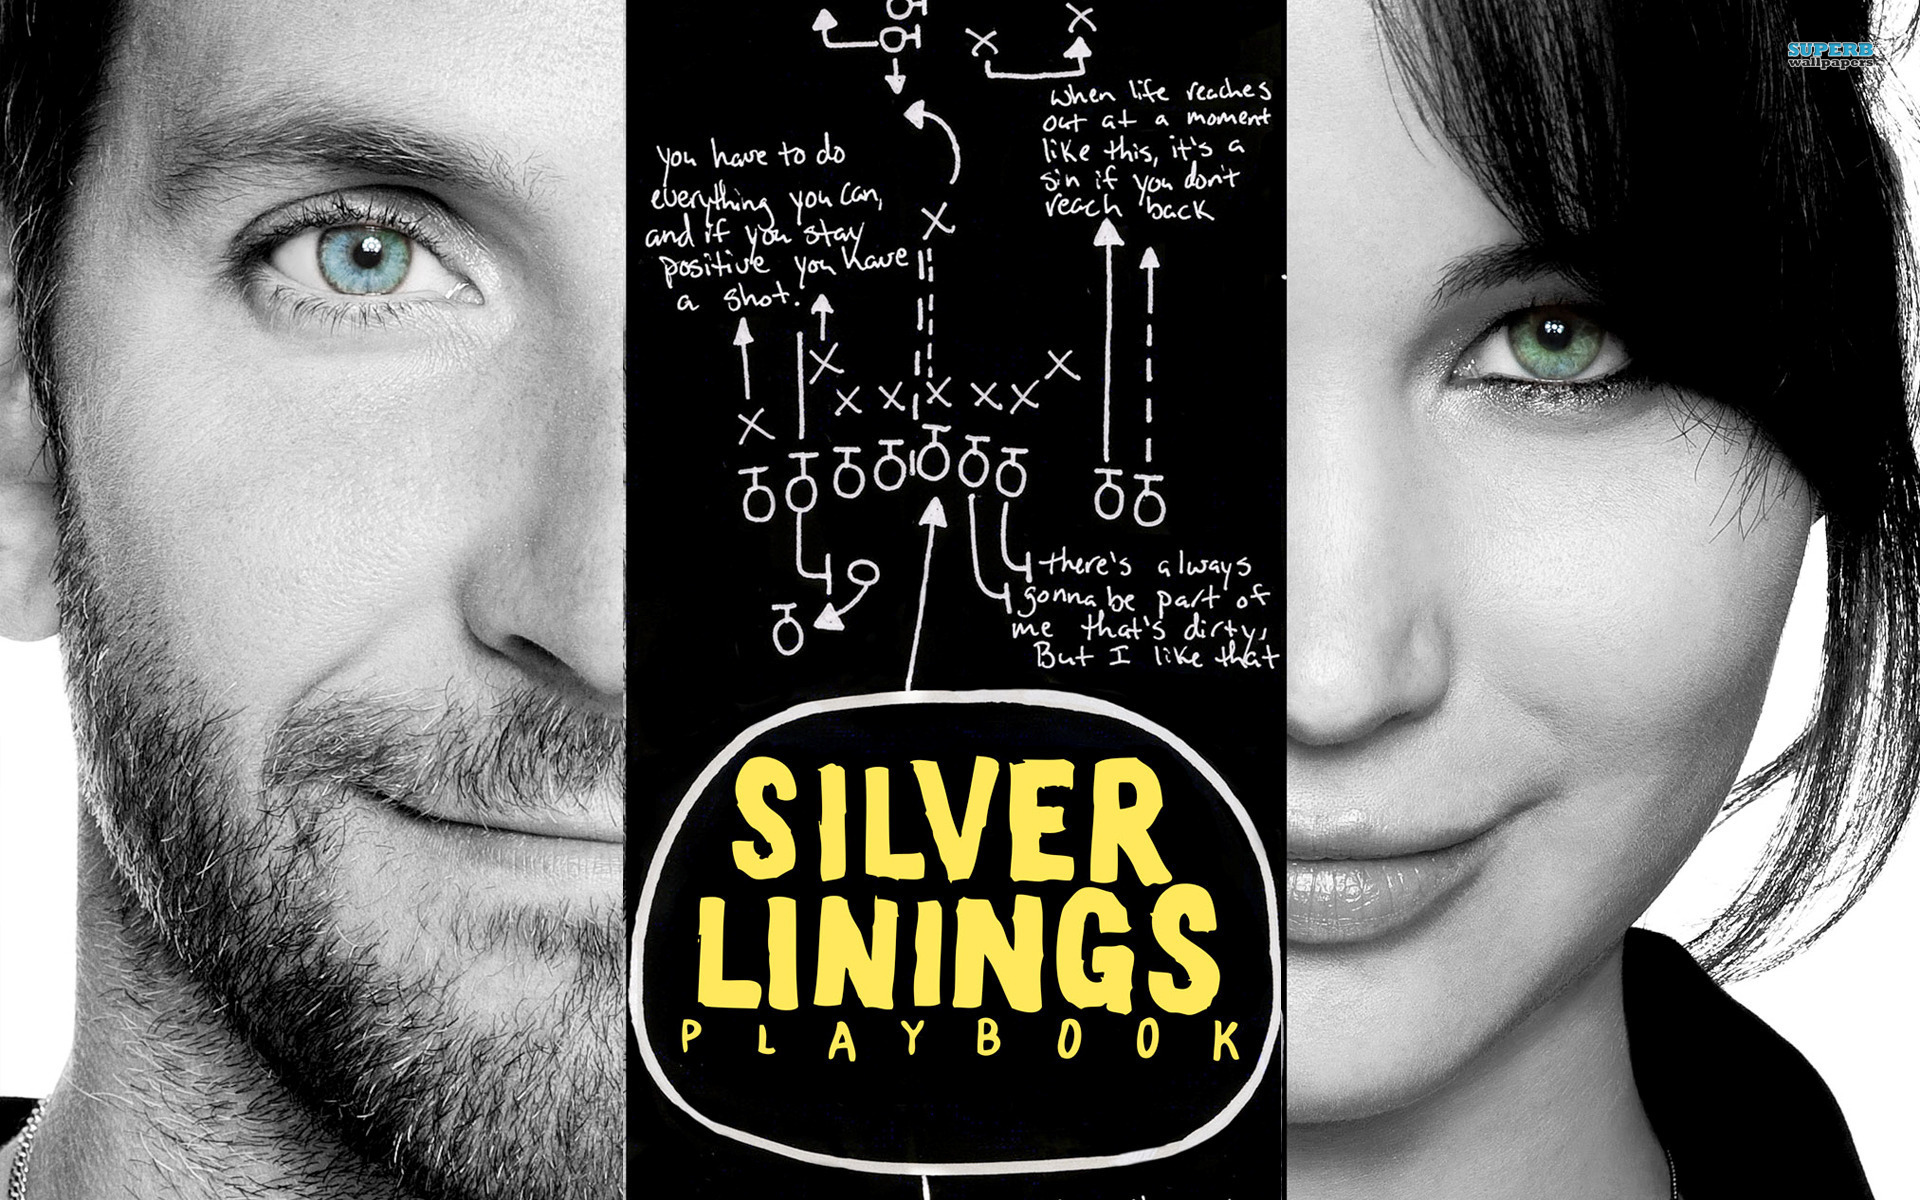 Review of “Silver Linings Playbook” in the Perspective of Mental Illness